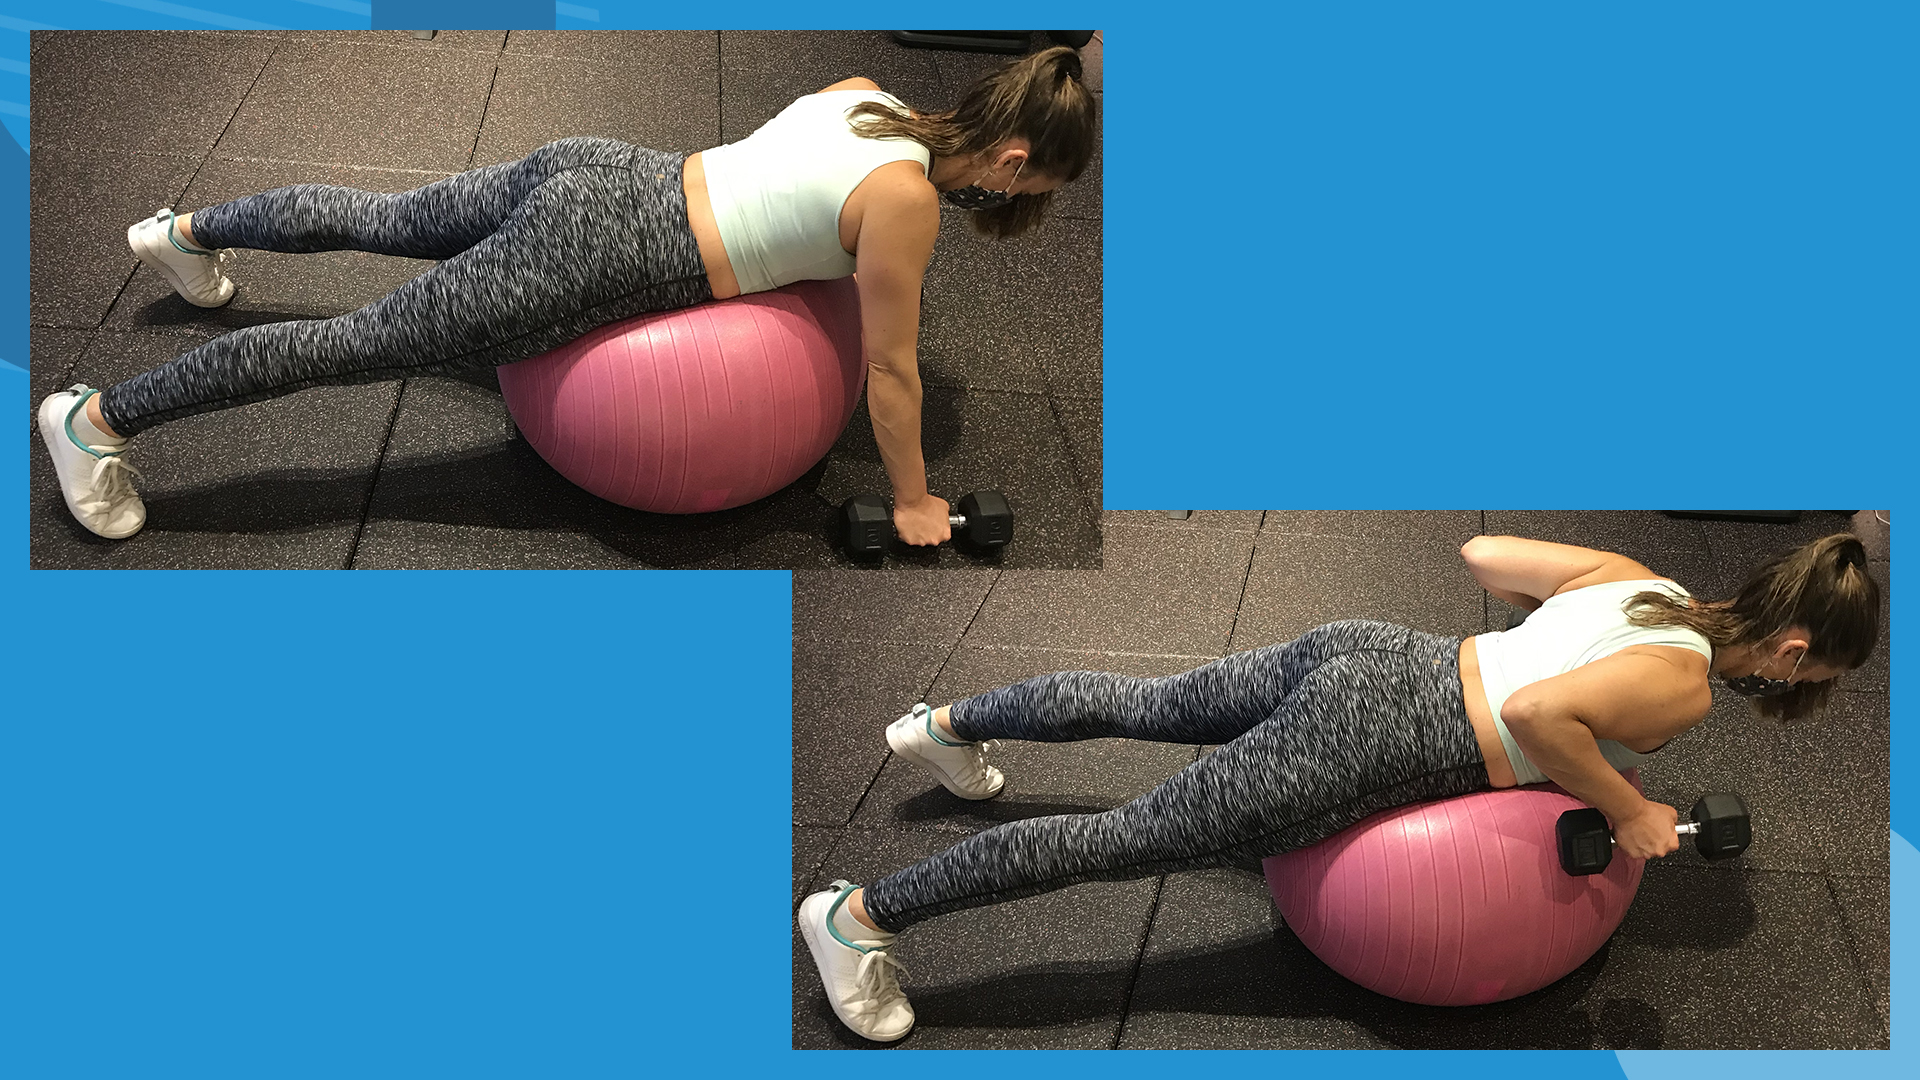 Back Exercises For Exercise Ball